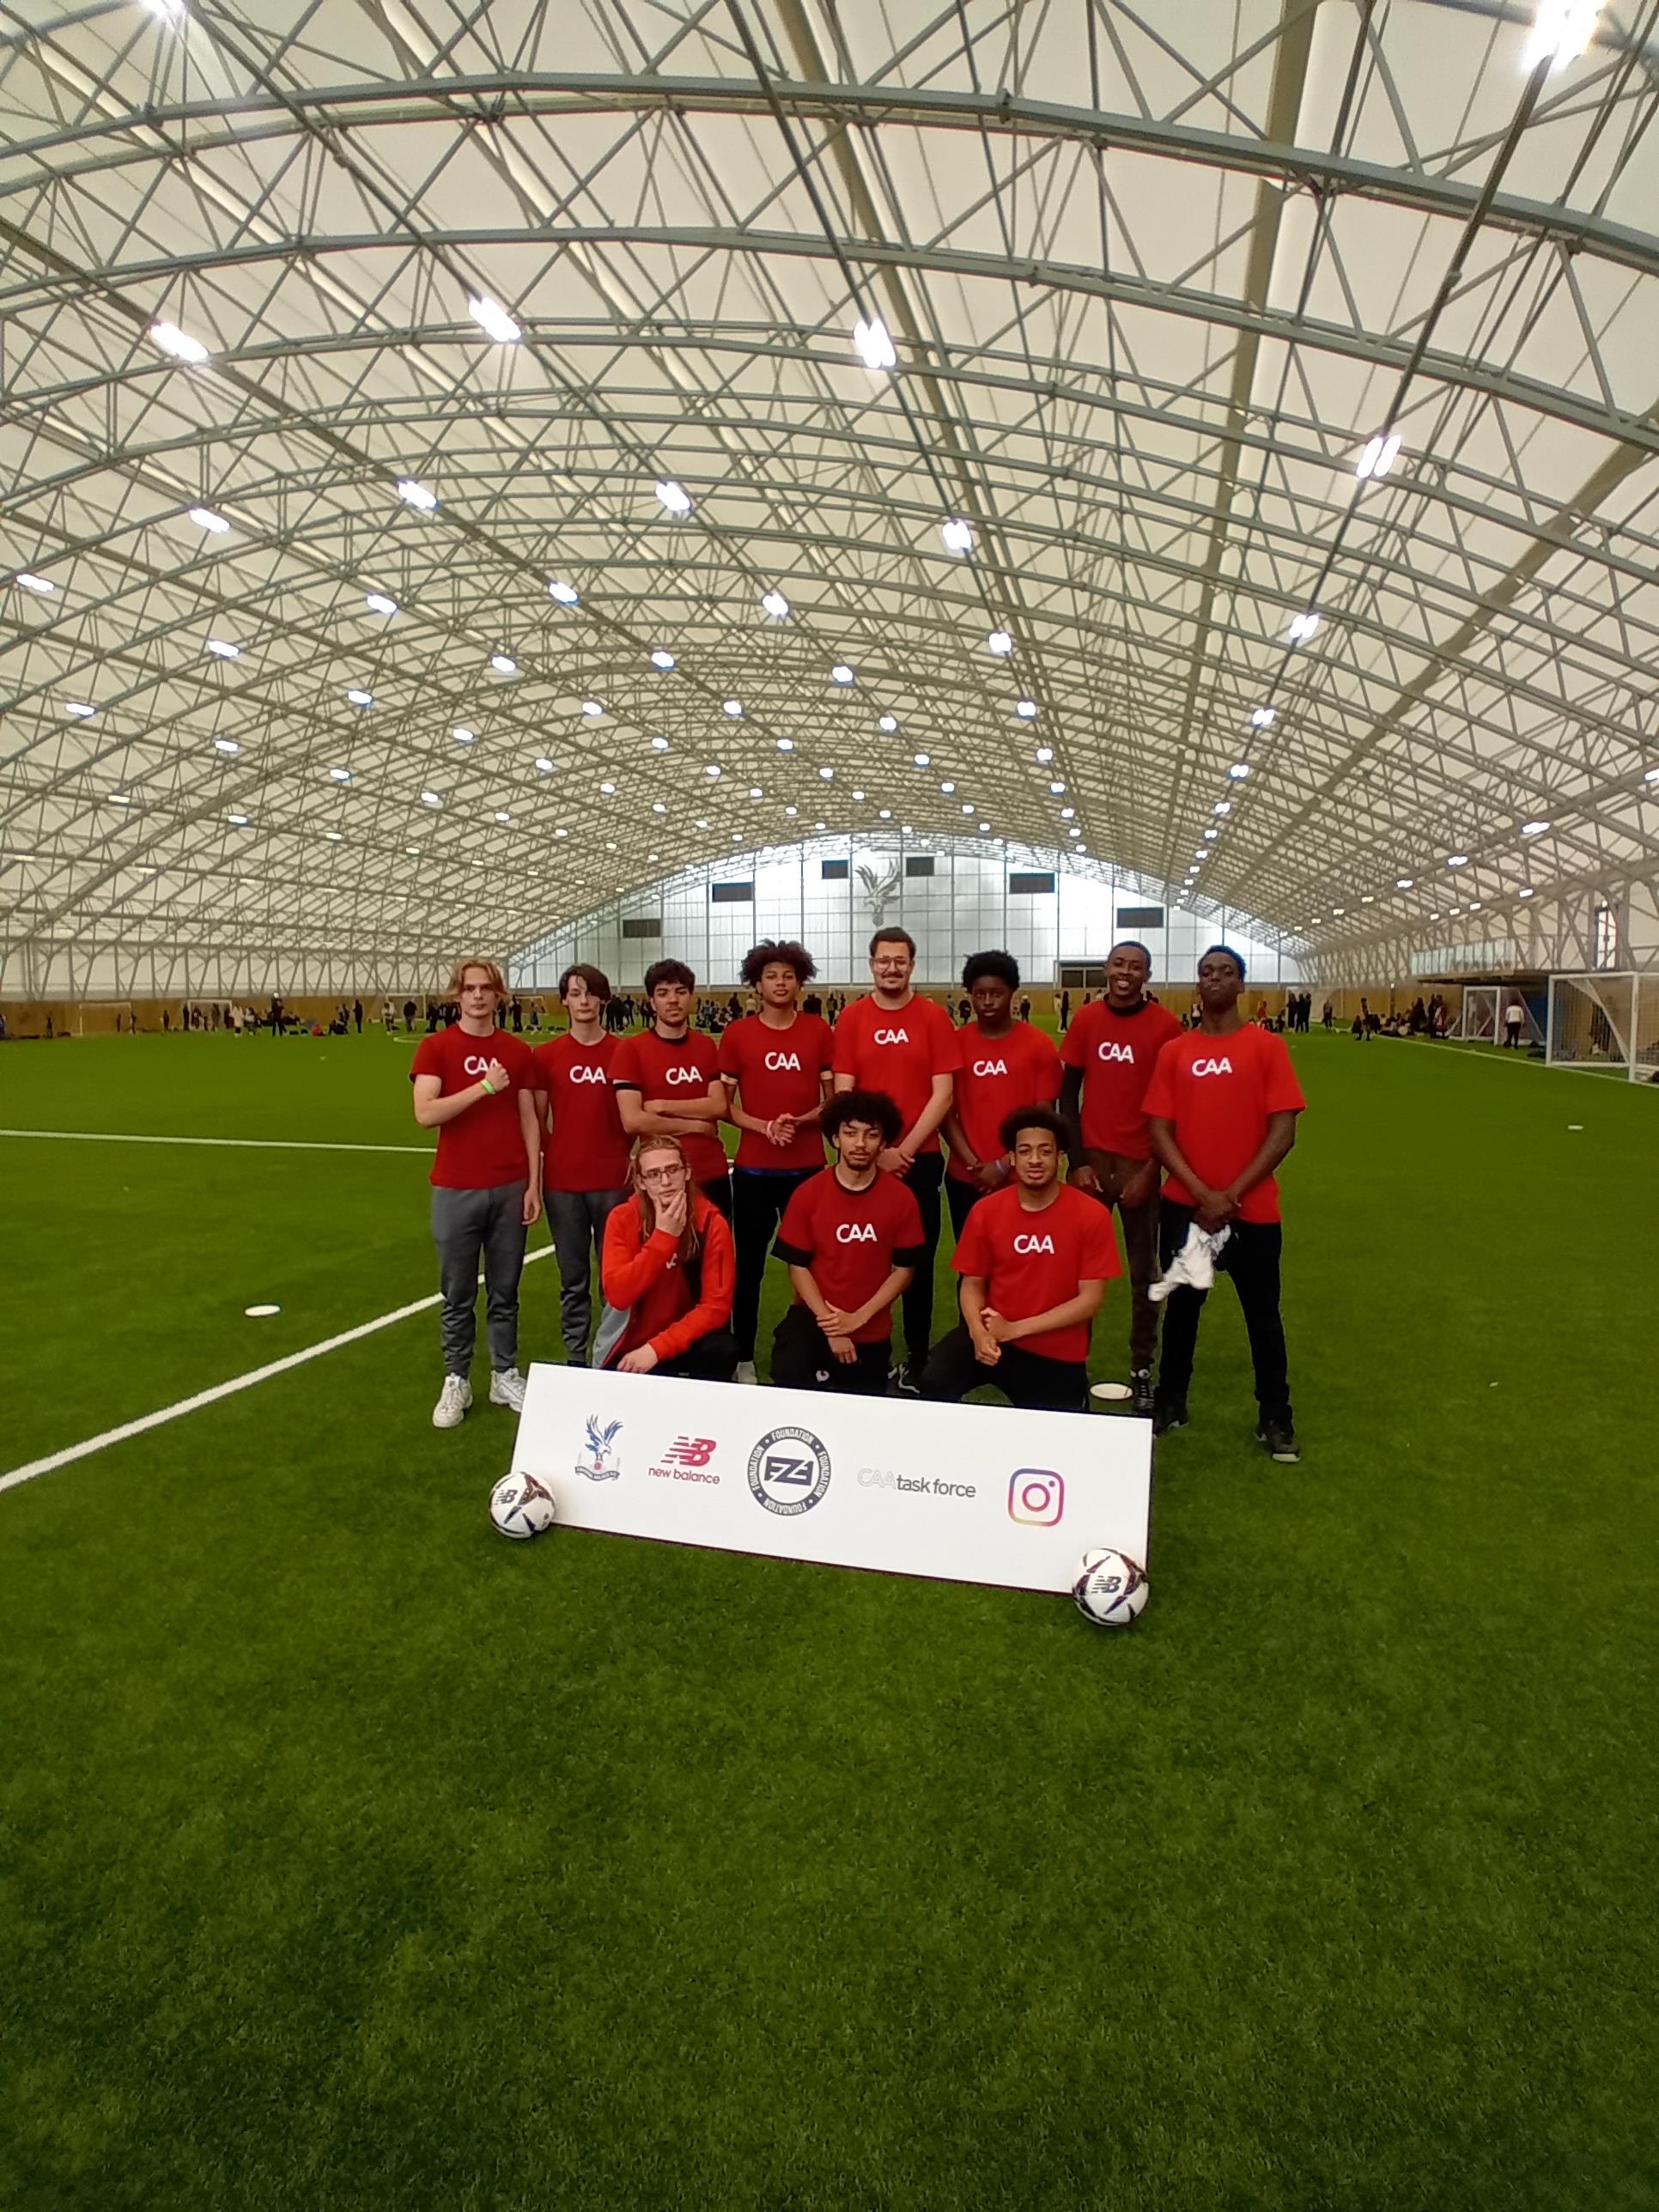 John Roan Students Excel as Volunteers at Crystal Palace Football Event